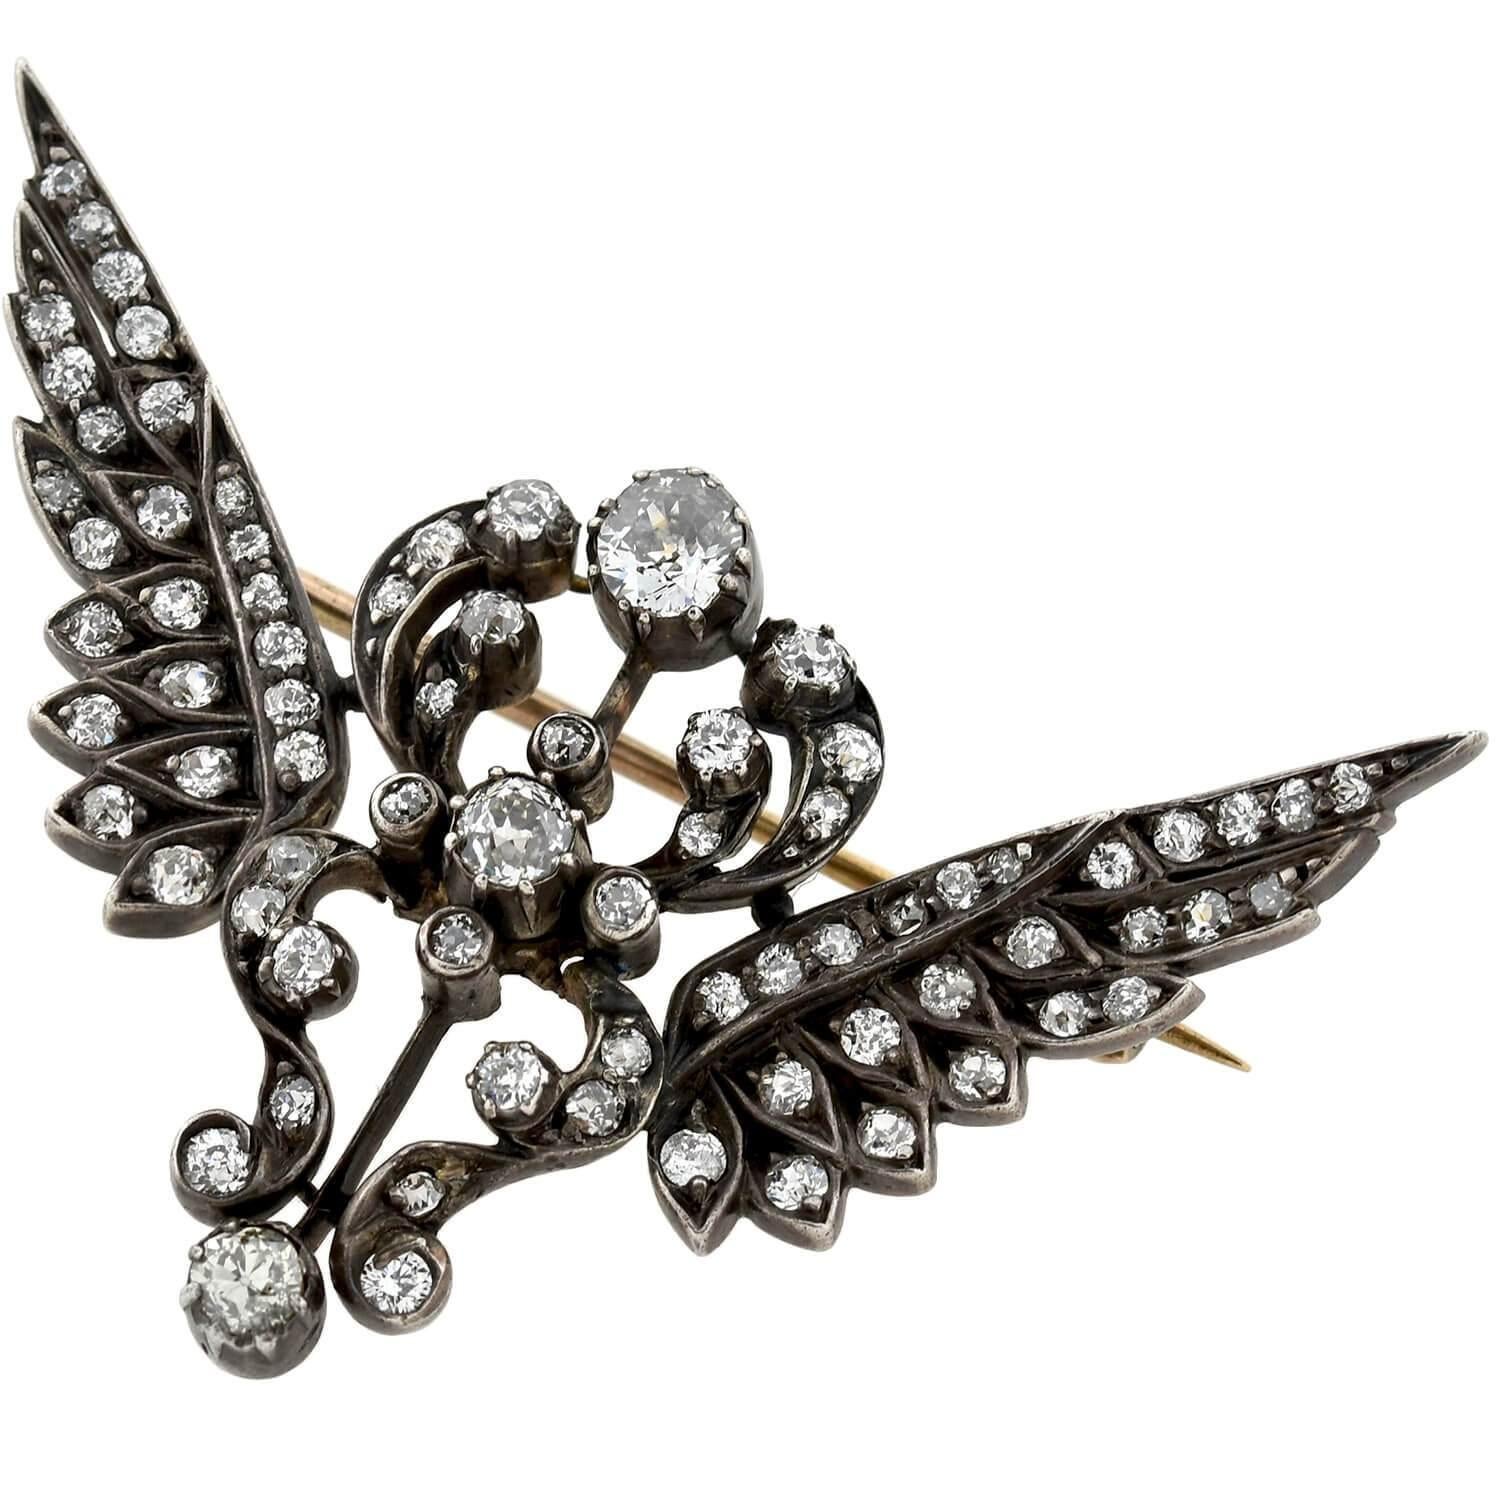 An absolutely stunning diamond wing pin from the Victorian (ca1880) era! This spectacular piece is crafted in 15kt rose gold topped in sterling silver and forms the shape of a fabulous open winged motif with an ornate center. Incredible old Mine Cut